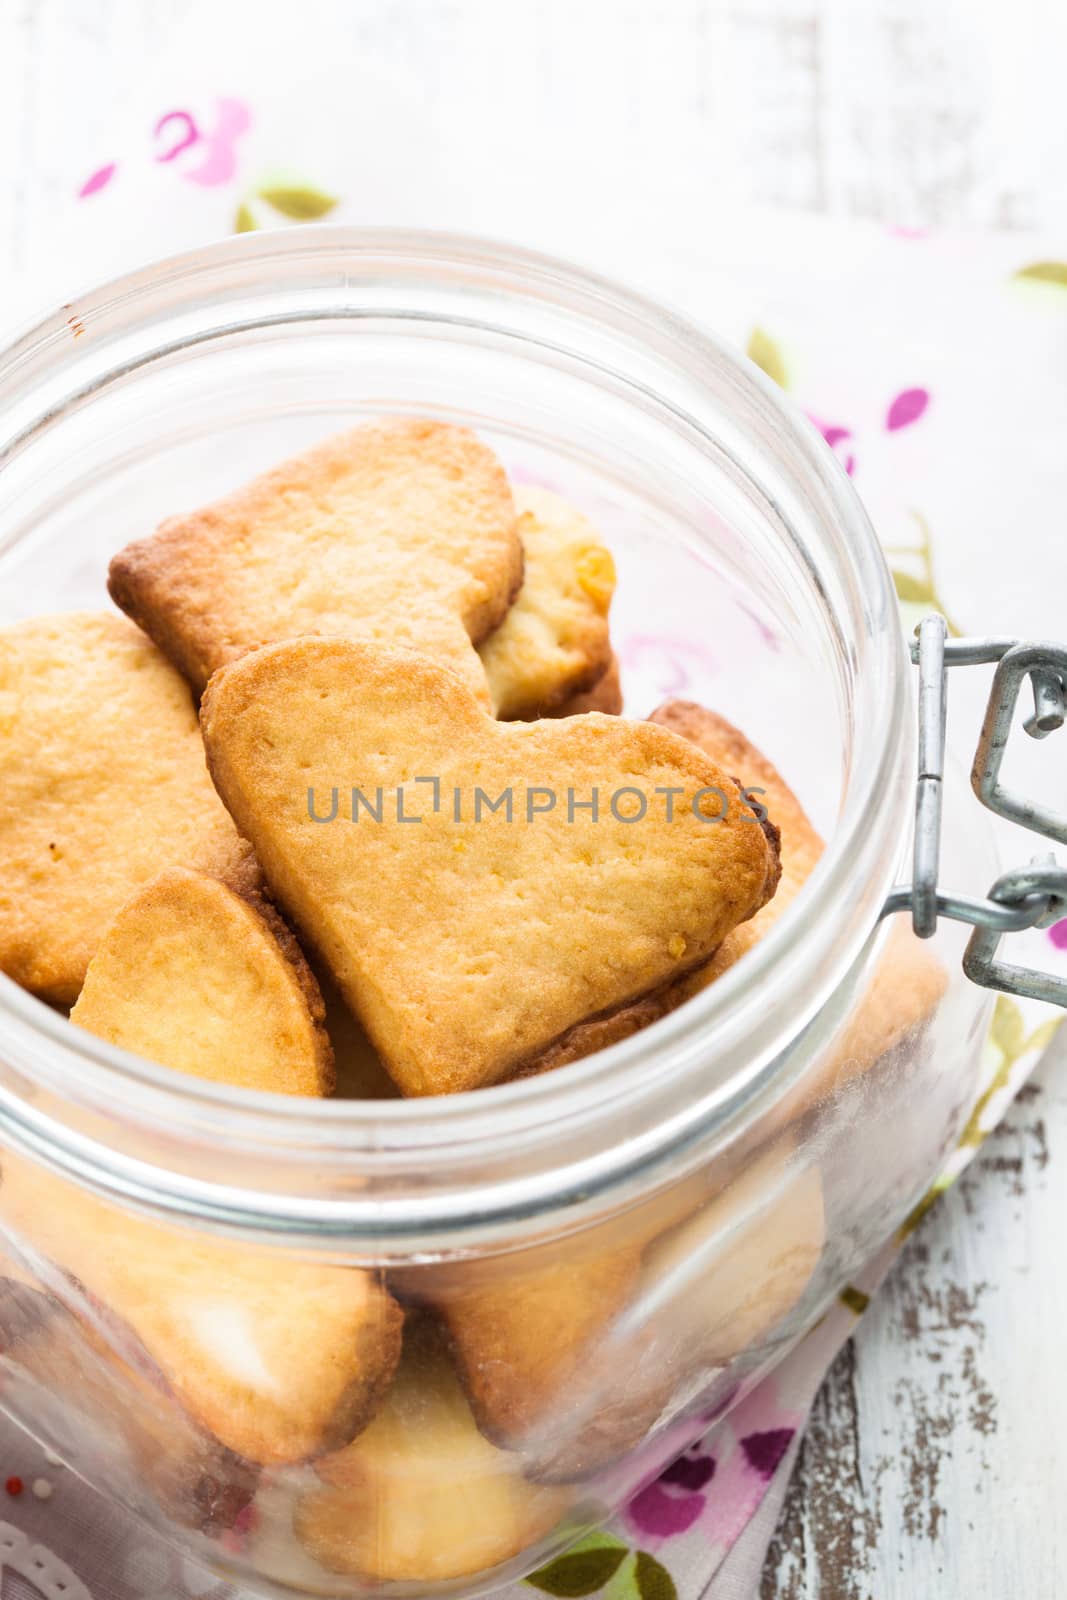 Cookie as a heart shaped valentine decor in glass jar